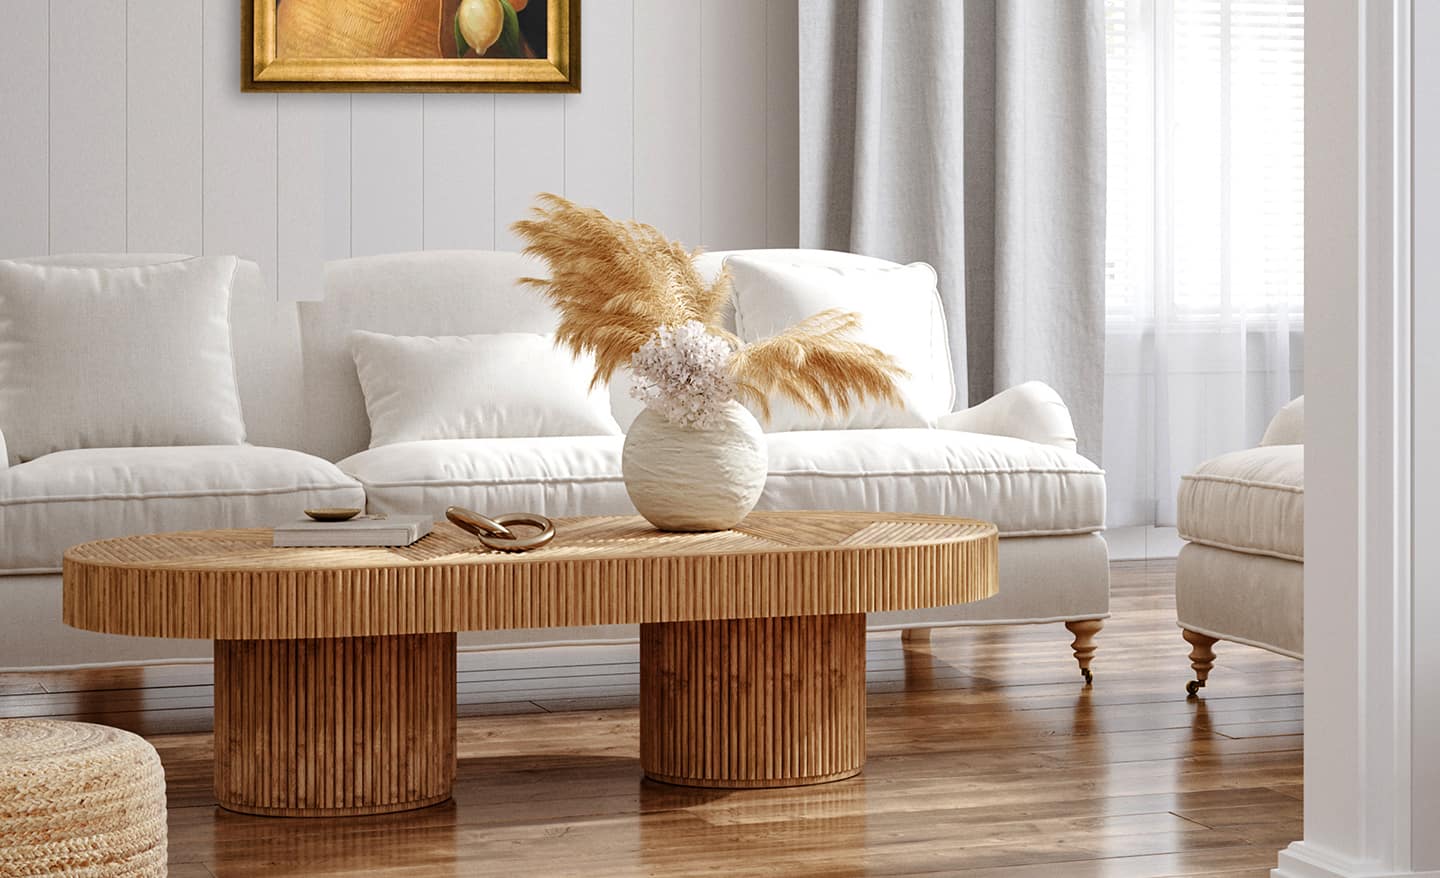 Wood coffee table with objects in a white living room